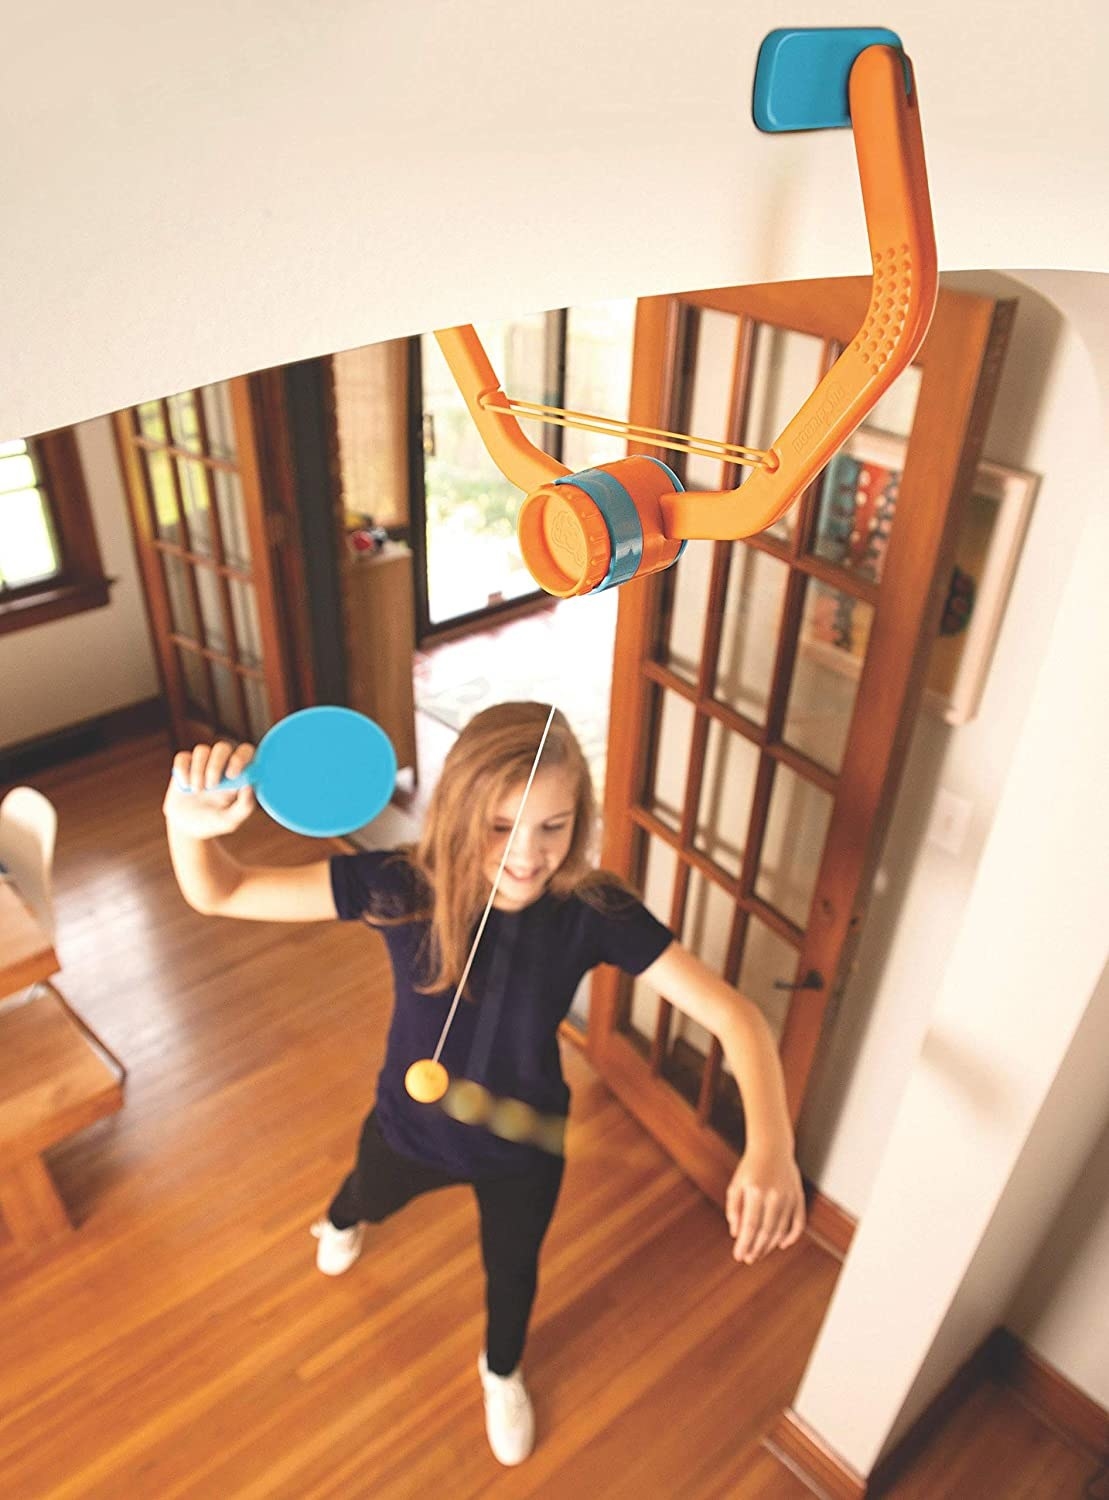 Child model playing ping pong with toy hanging from doorway